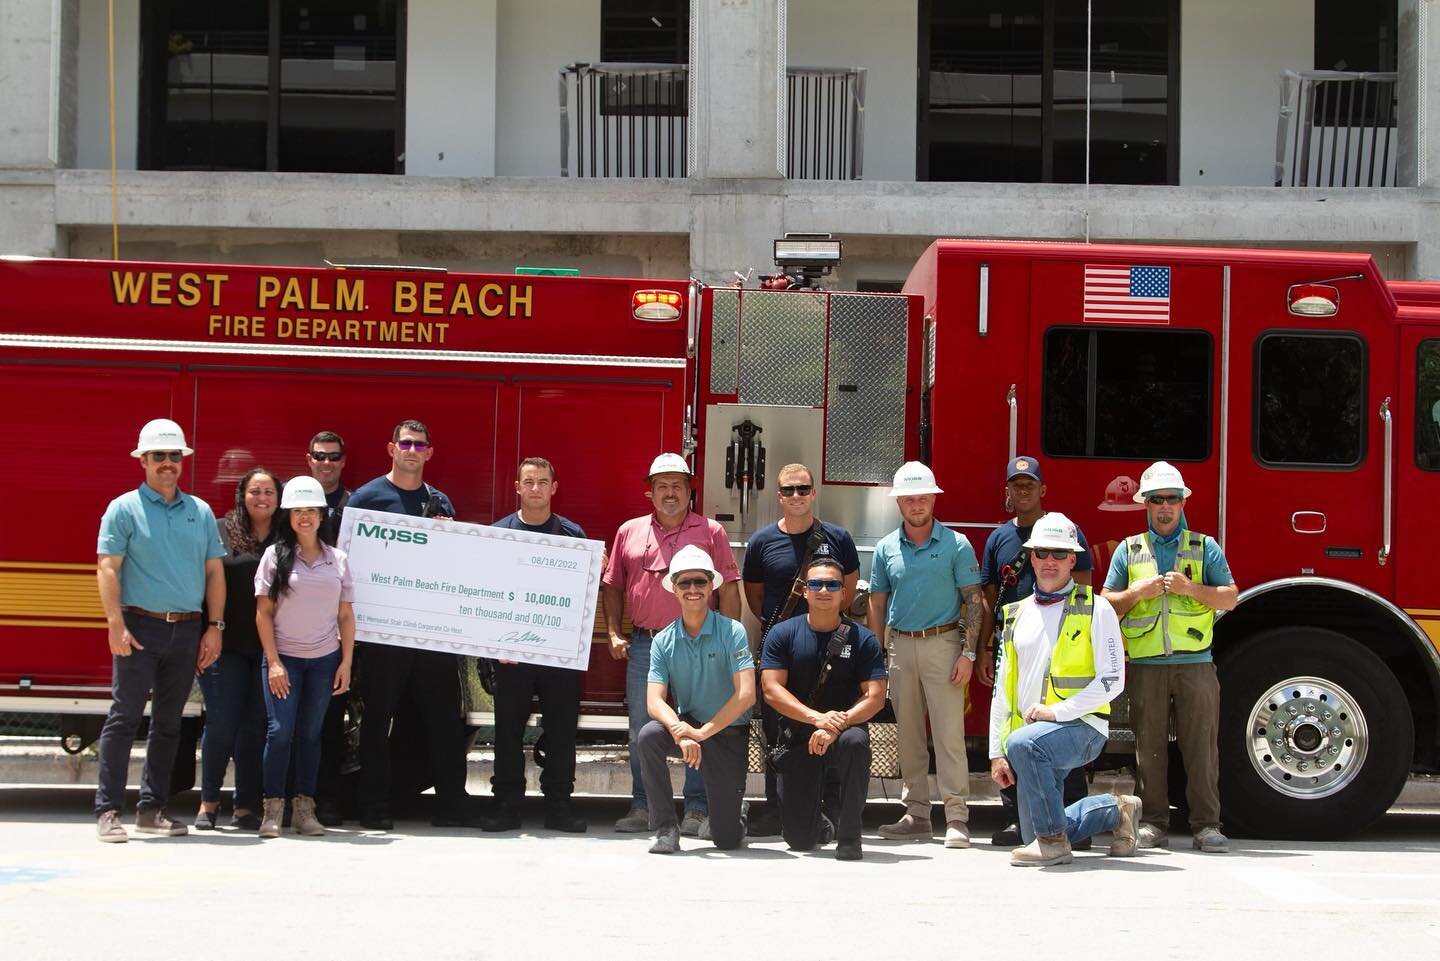 The crews got to receive a huge donation from @mossconstruction at a new site build in west palm! Your donation will have a huge impact back in the community. Thank you very much!